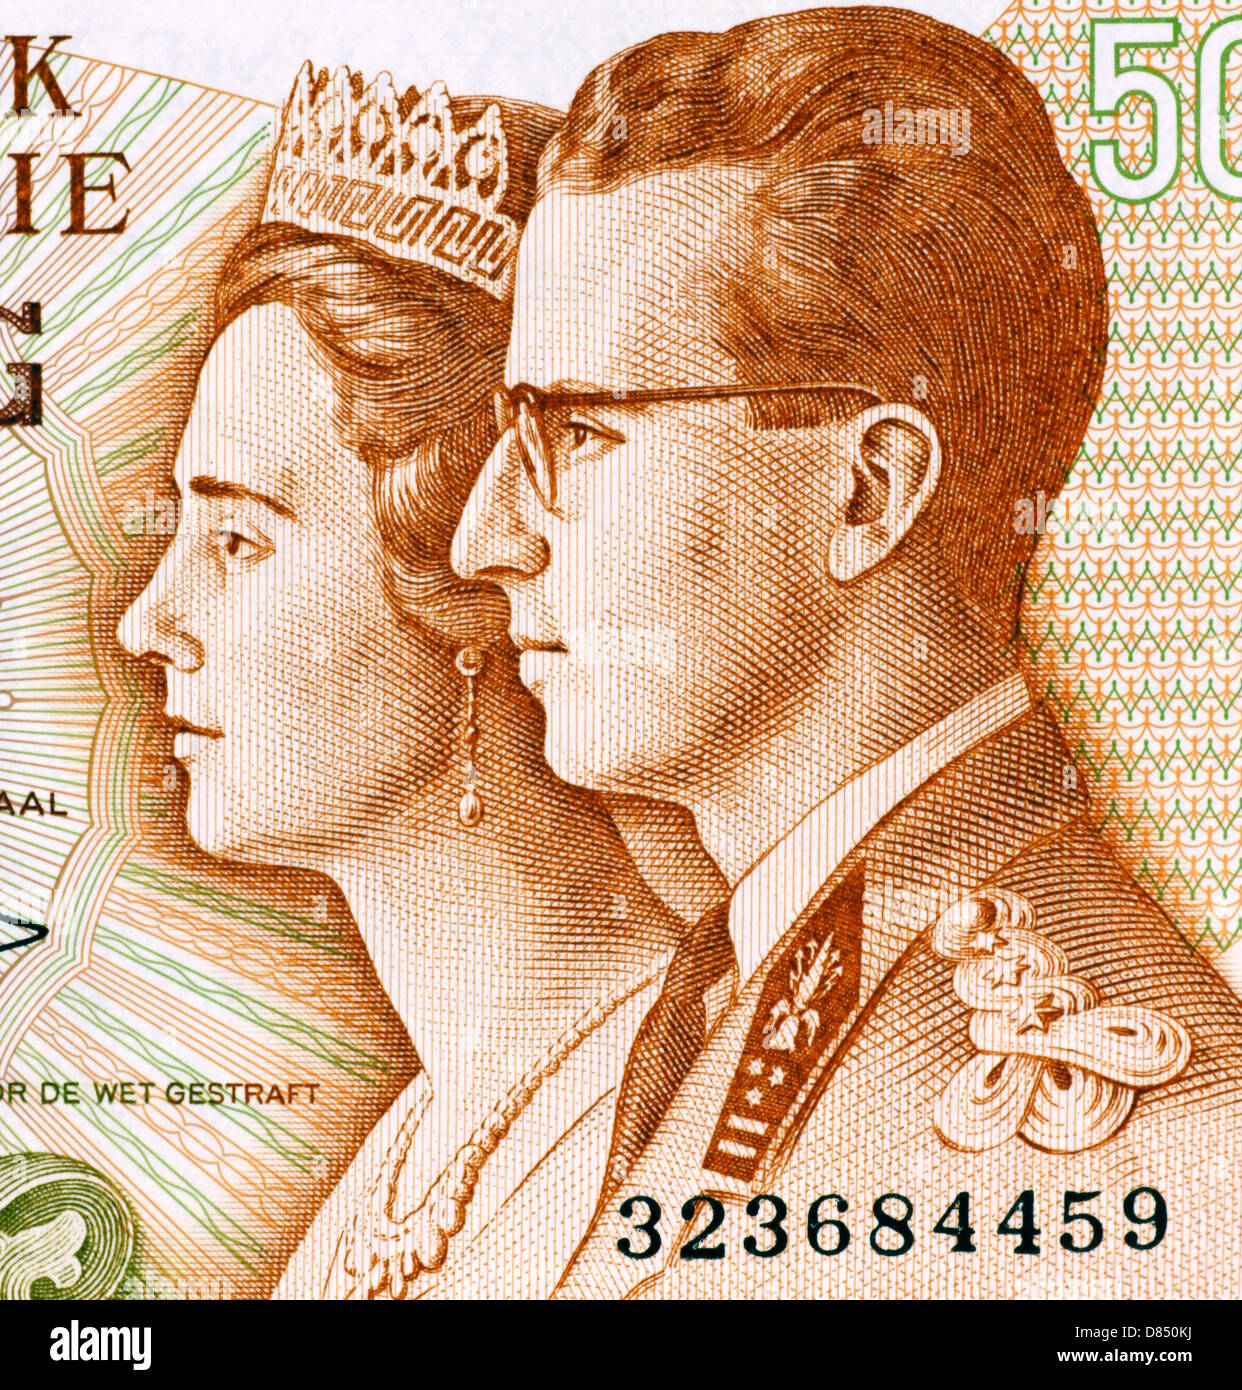 King Baudouin I and Queen Fabiola on 50 Francs 1966 Banknote from Belgium. Stock Photo